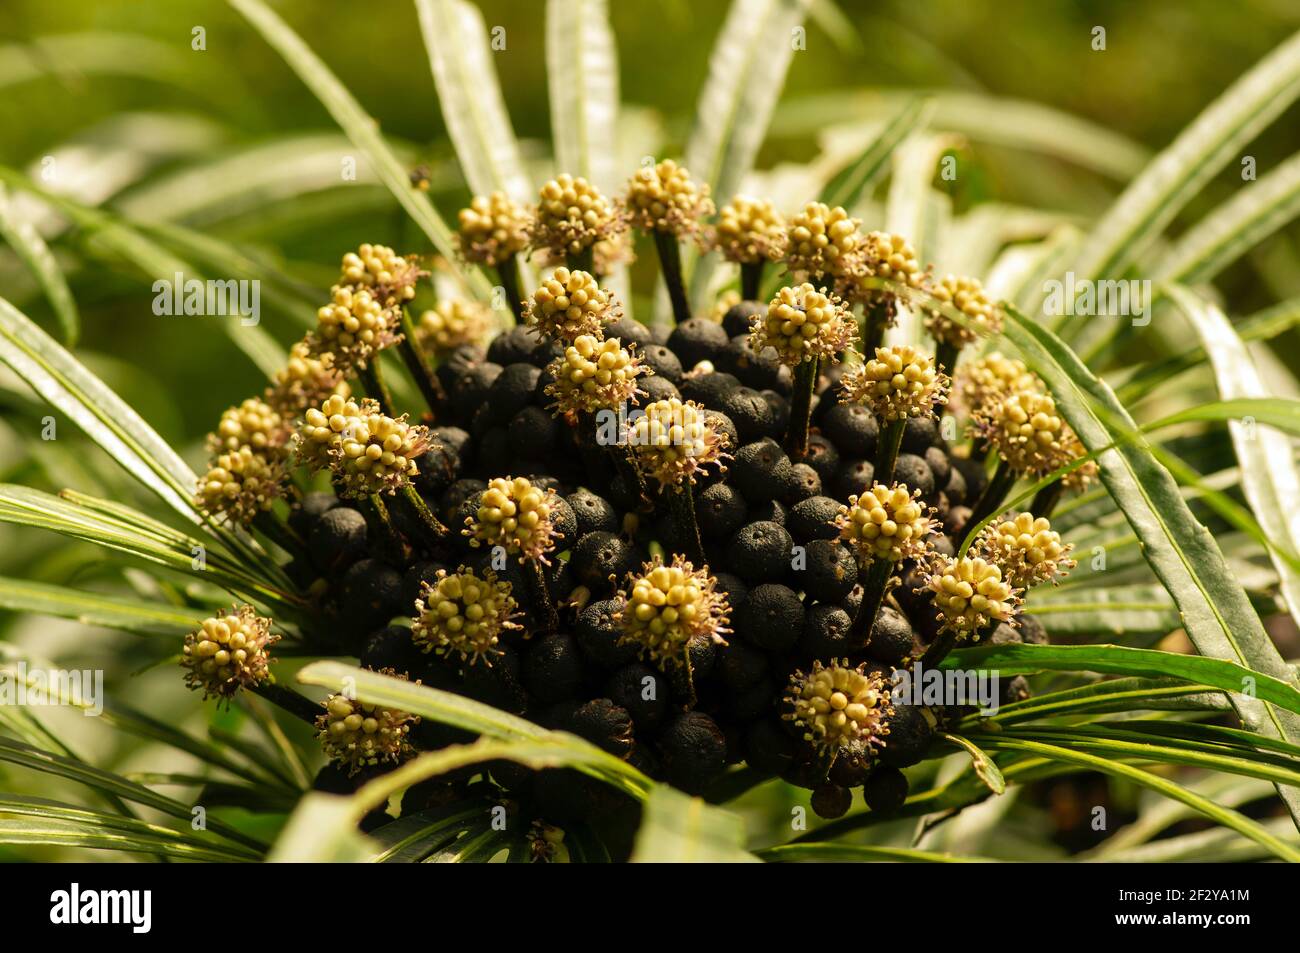 Miagos Bush flower (Osmoxylon lineare) blooming in shallow focus, a popular shrub cultivated as hedges and house plants. Stock Photo